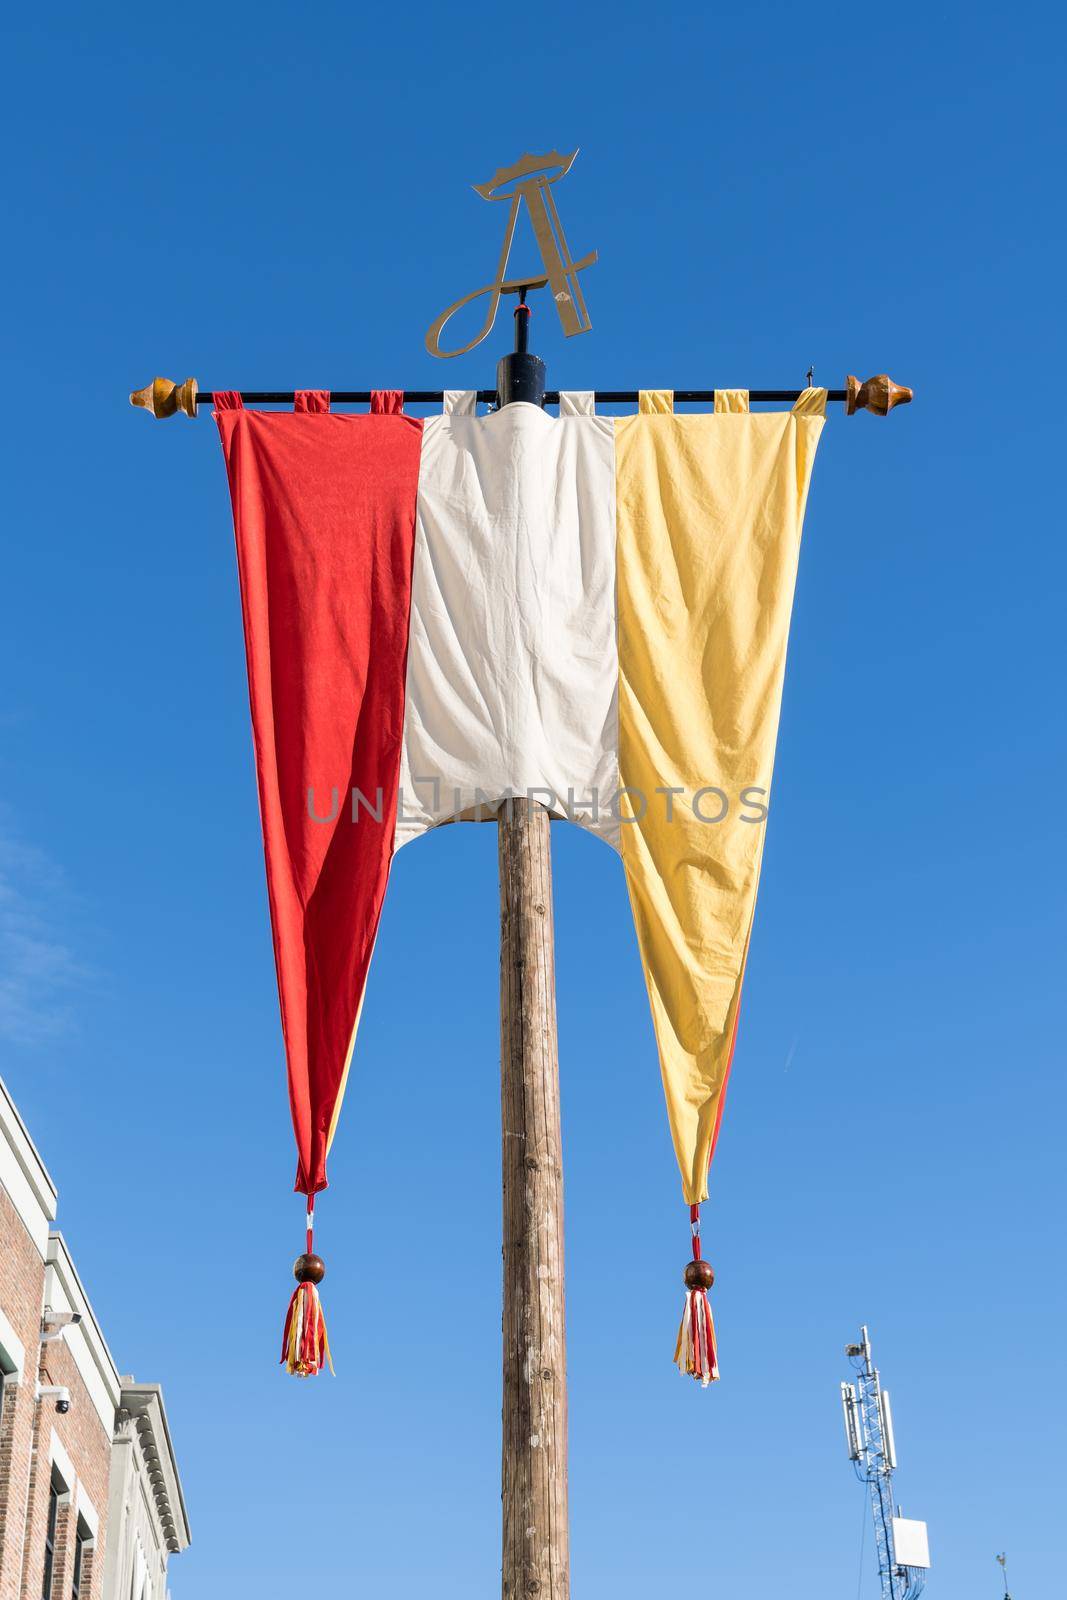 Dutch Flag, in red, white and yellow, of traditional festival named Carnaval, like Mardi Gras, in 's-Hertogenbosch, Oeteldonk with a blue sky  by LeoniekvanderVliet